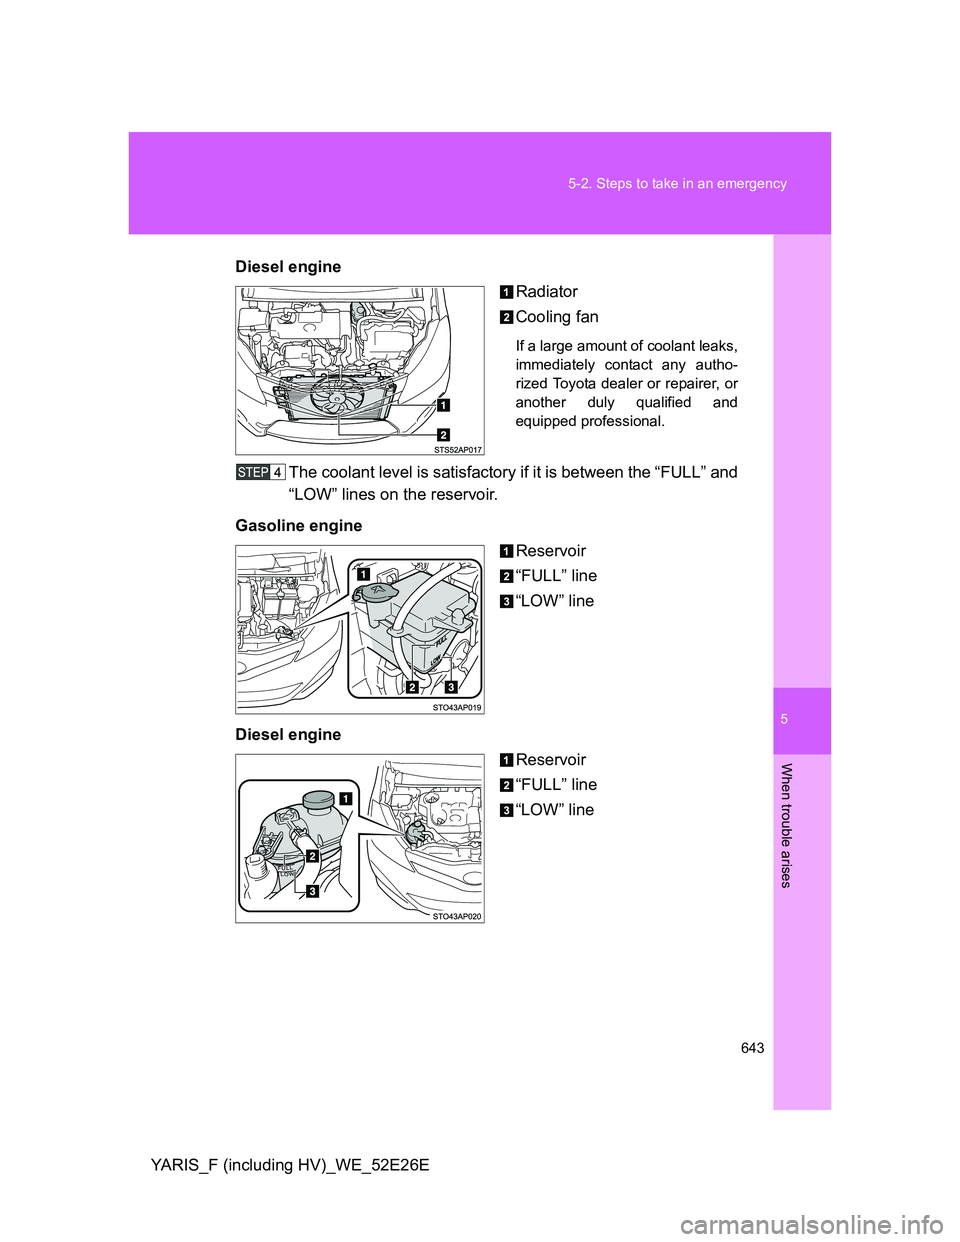 TOYOTA YARIS 2014  Owners Manual 5
643 5-2. Steps to take in an emergency
When trouble arises
YARIS_F (including HV)_WE_52E26EDiesel engine
Radiator
Cooling fan
If a large amount of coolant leaks,
immediately contact any autho-
rized